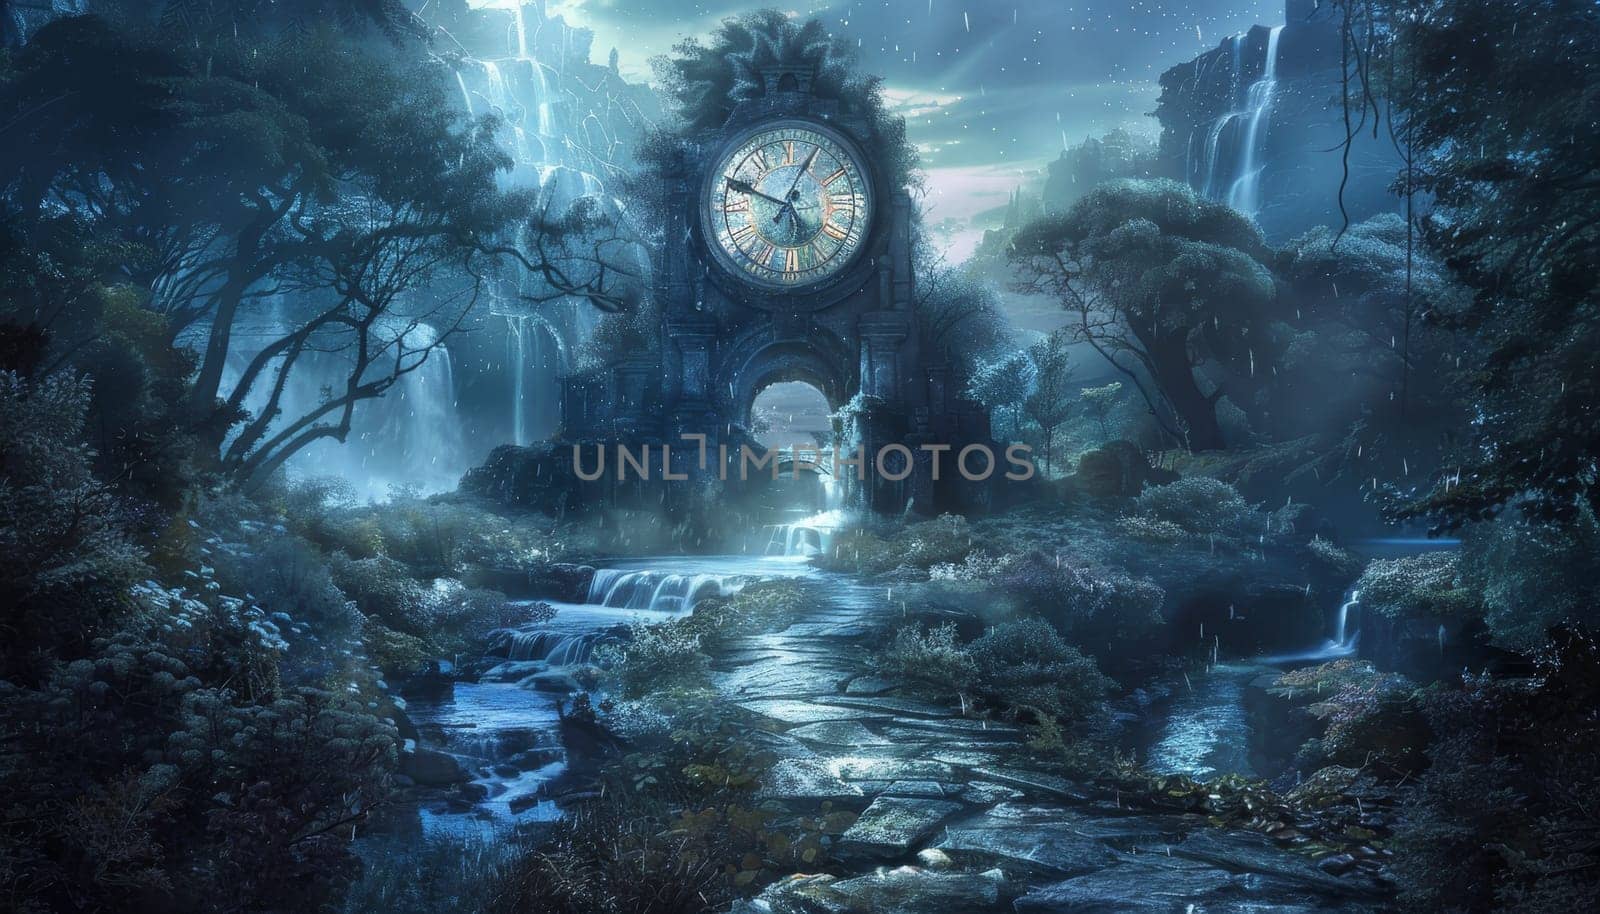 A clock tower in a forest with a water feature in front of it by AI generated image.